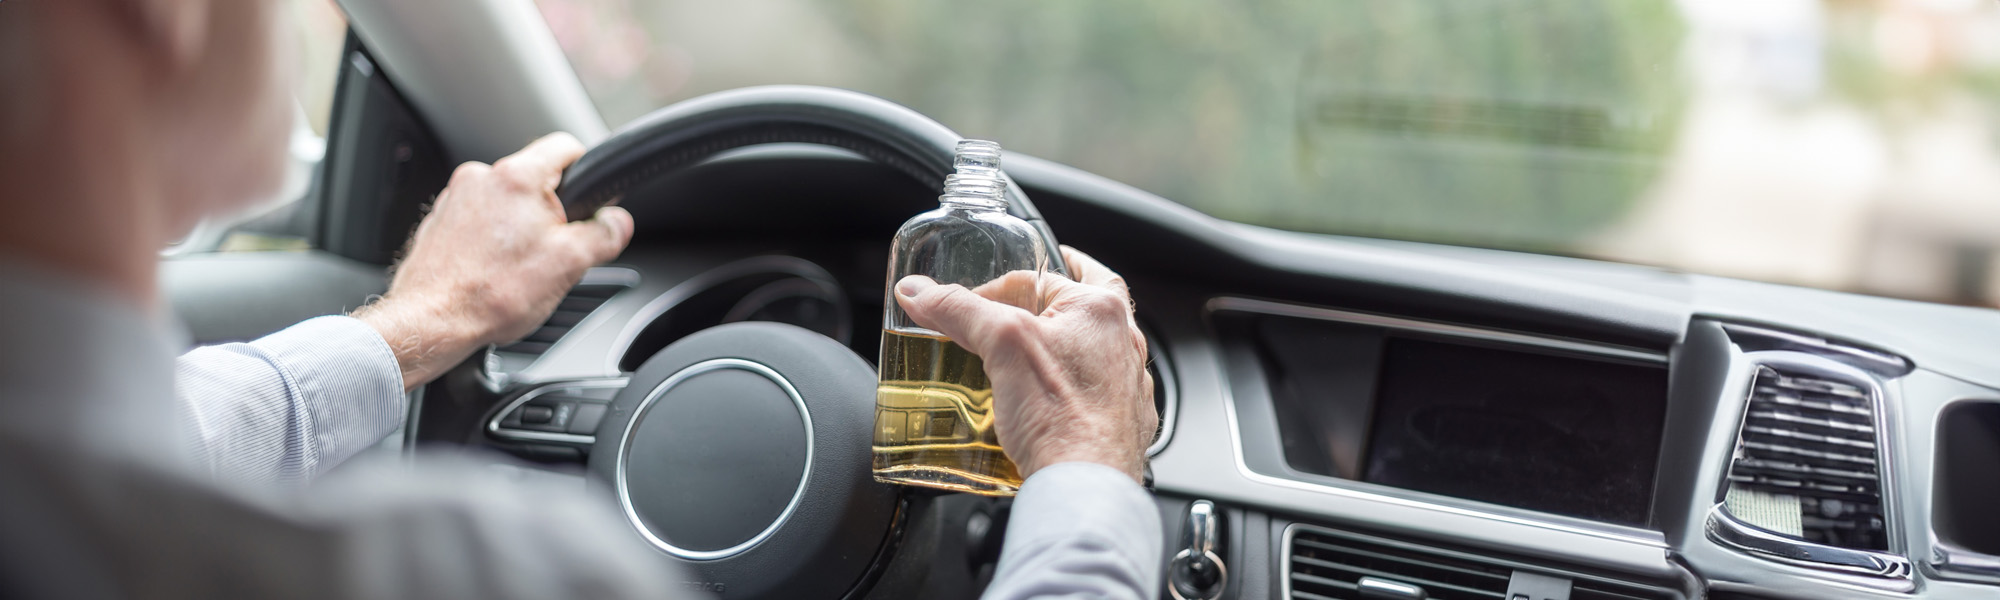 man driving with a liquor bottle